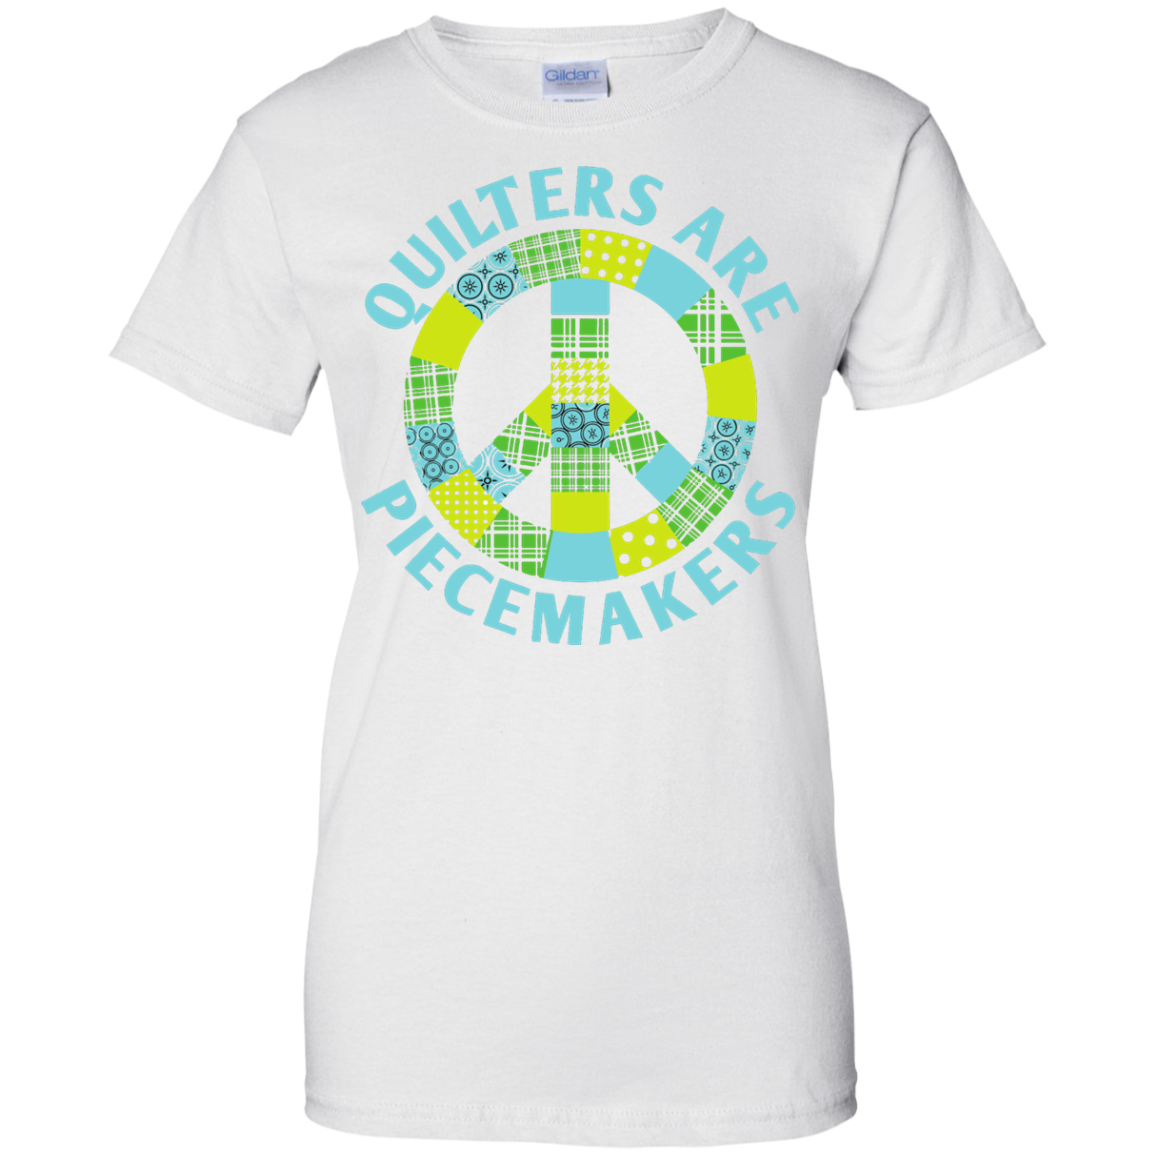 Quilters are Piecemakers Ladies Custom 100% Cotton T-Shirt - Crafter4Life - 2